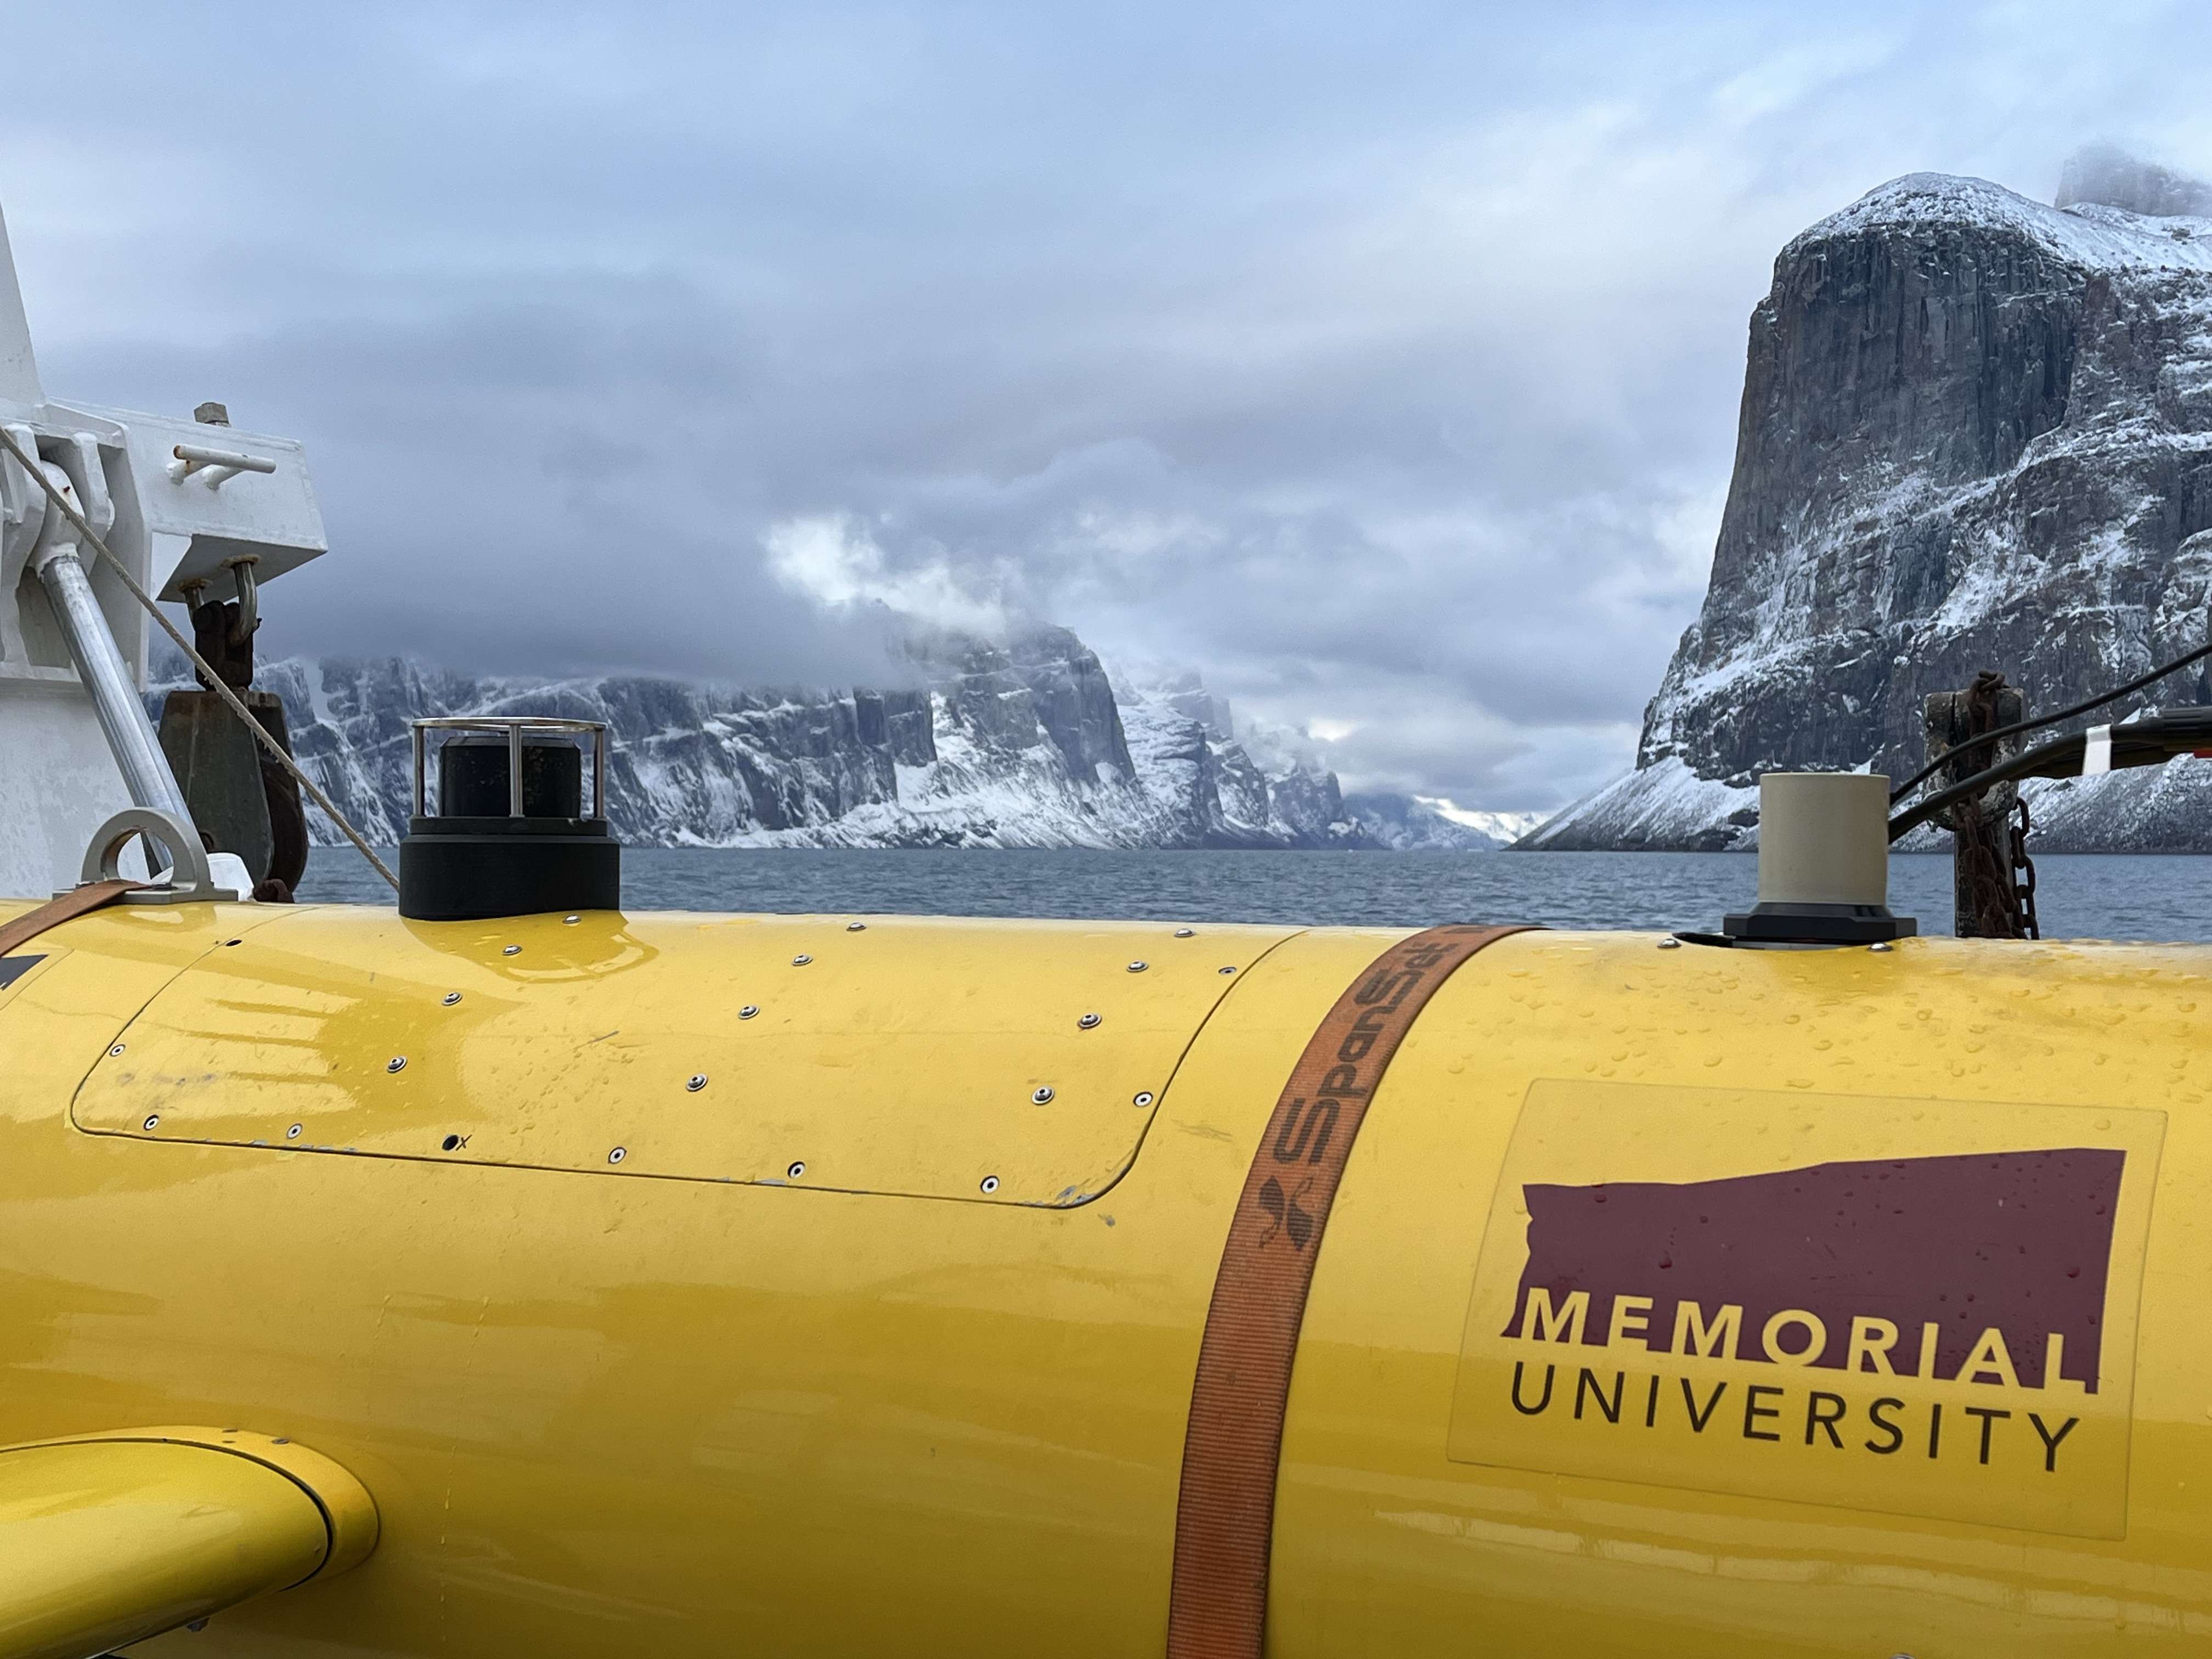 A yellow R.O.V. with Memorial's logo on the side, with the mountains and ocean in Baffin Bay in the background